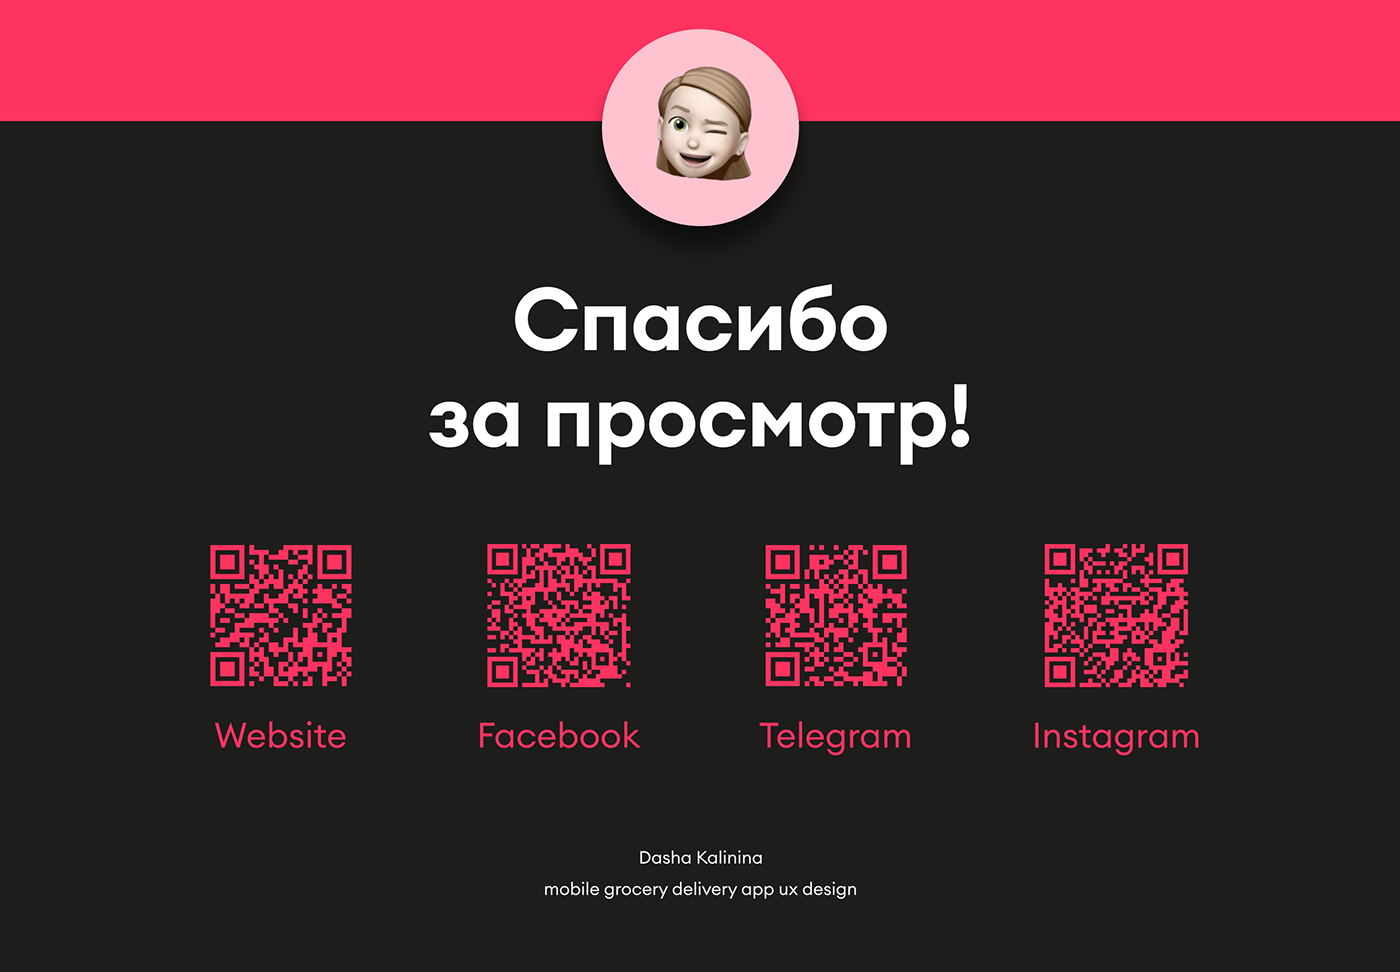 app design Interface ux delivery app grosery store Mobile app UI student Education Самокат